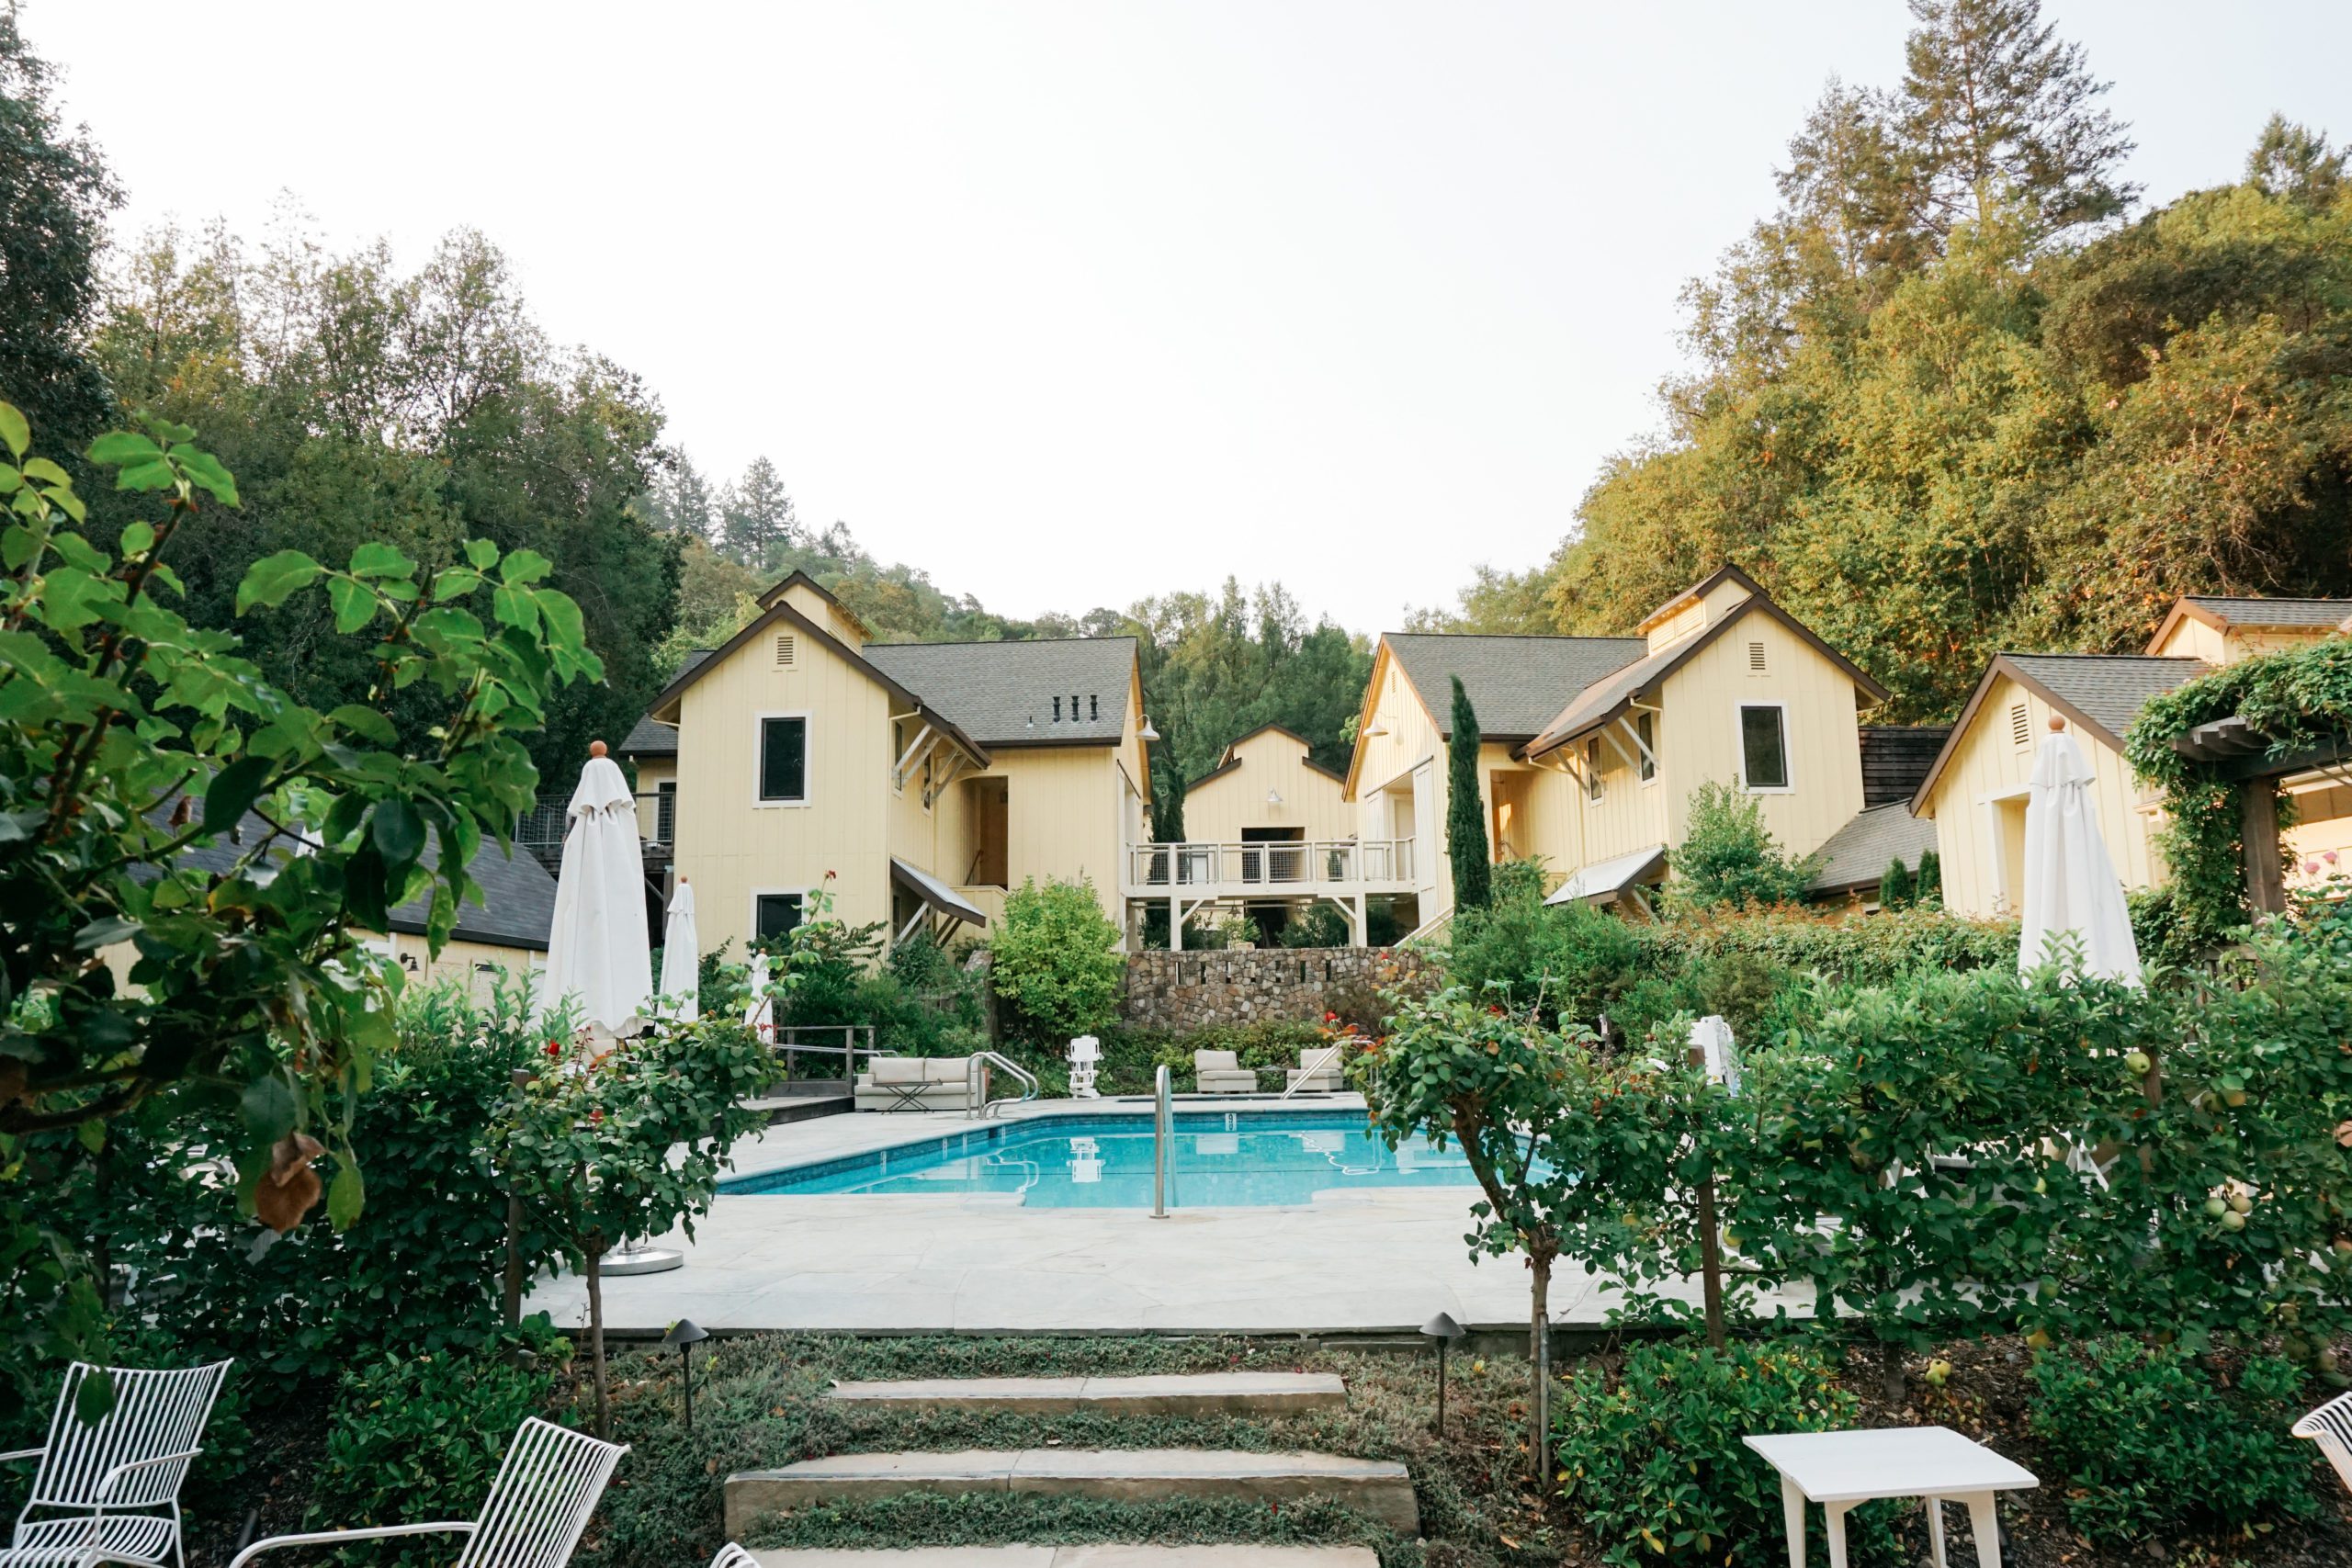 Farmhouse Inn is a luxury boutique hotel in Sonoma with a Michelin star restaurant